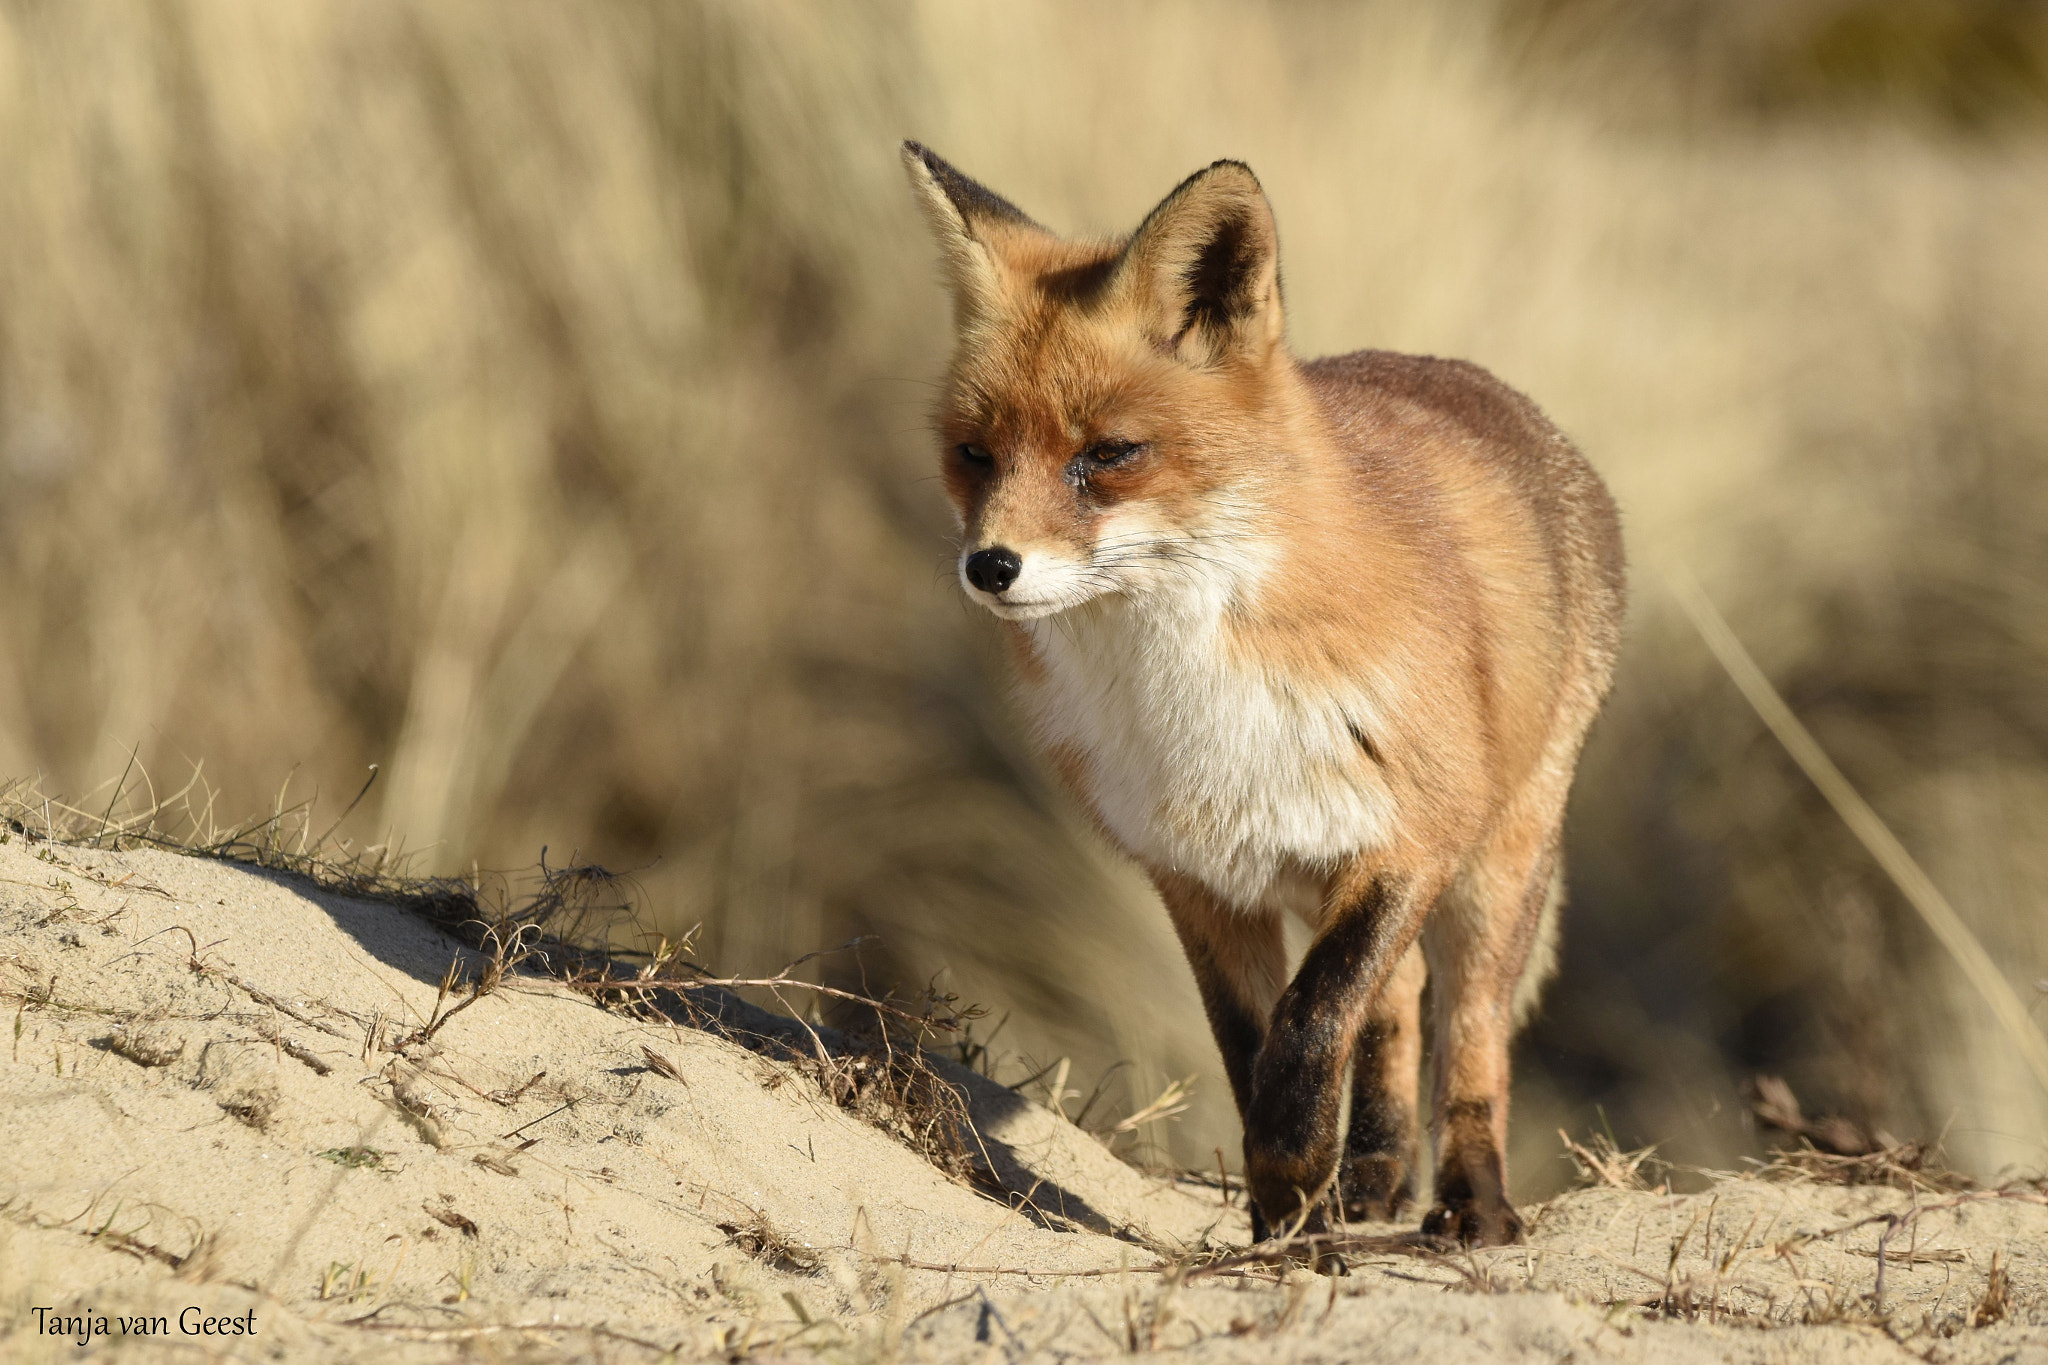 Nikon D5500 + Sigma 150-600mm F5-6.3 DG OS HSM | C sample photo. Red fox in the dunes photography